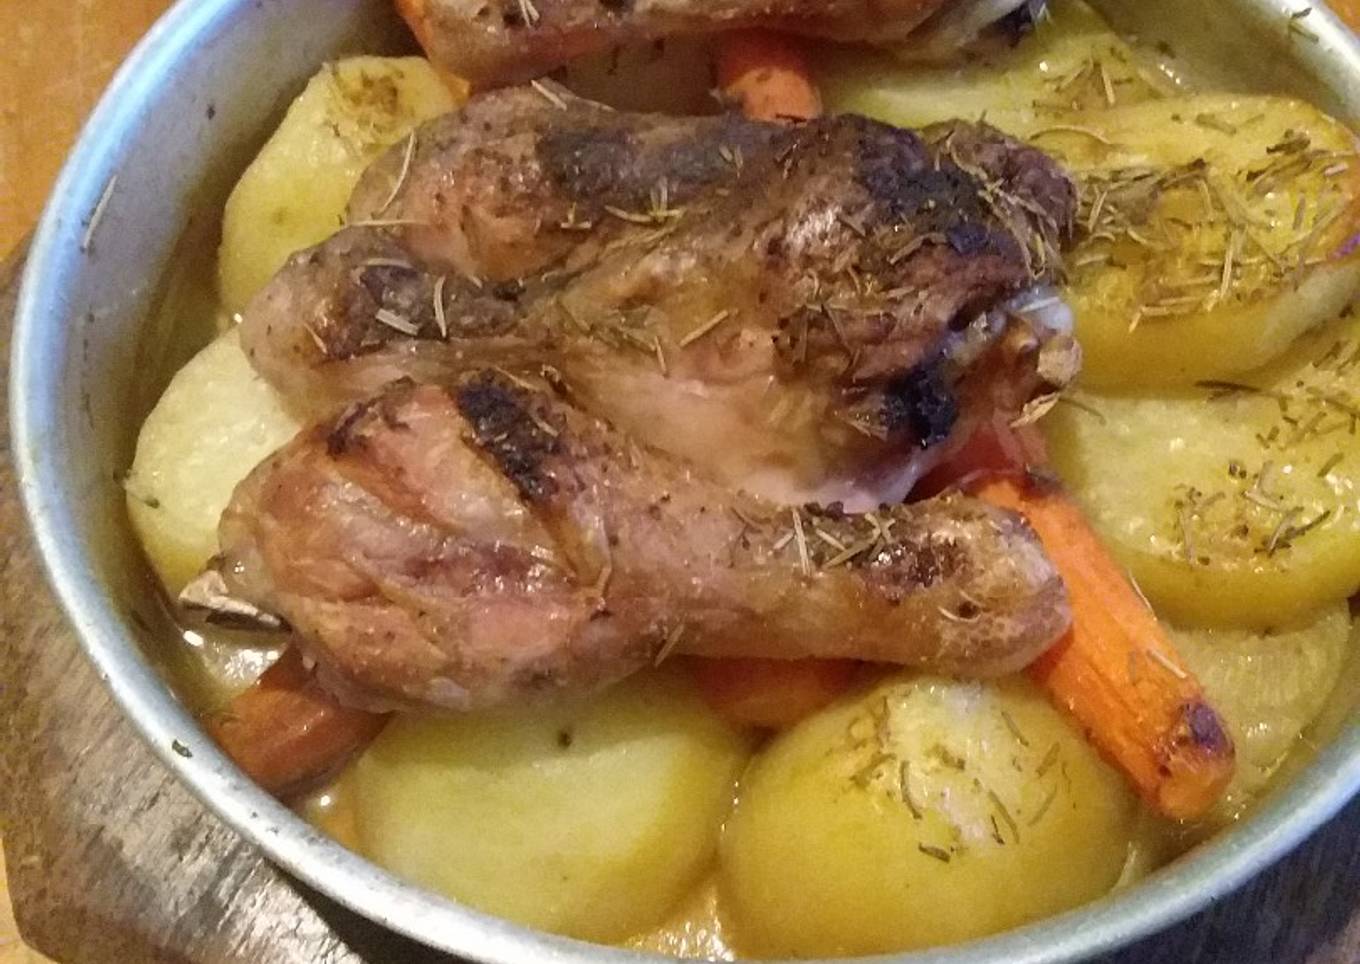 Patata fil form(Oven baked potatoes with Chicken drumsticks)